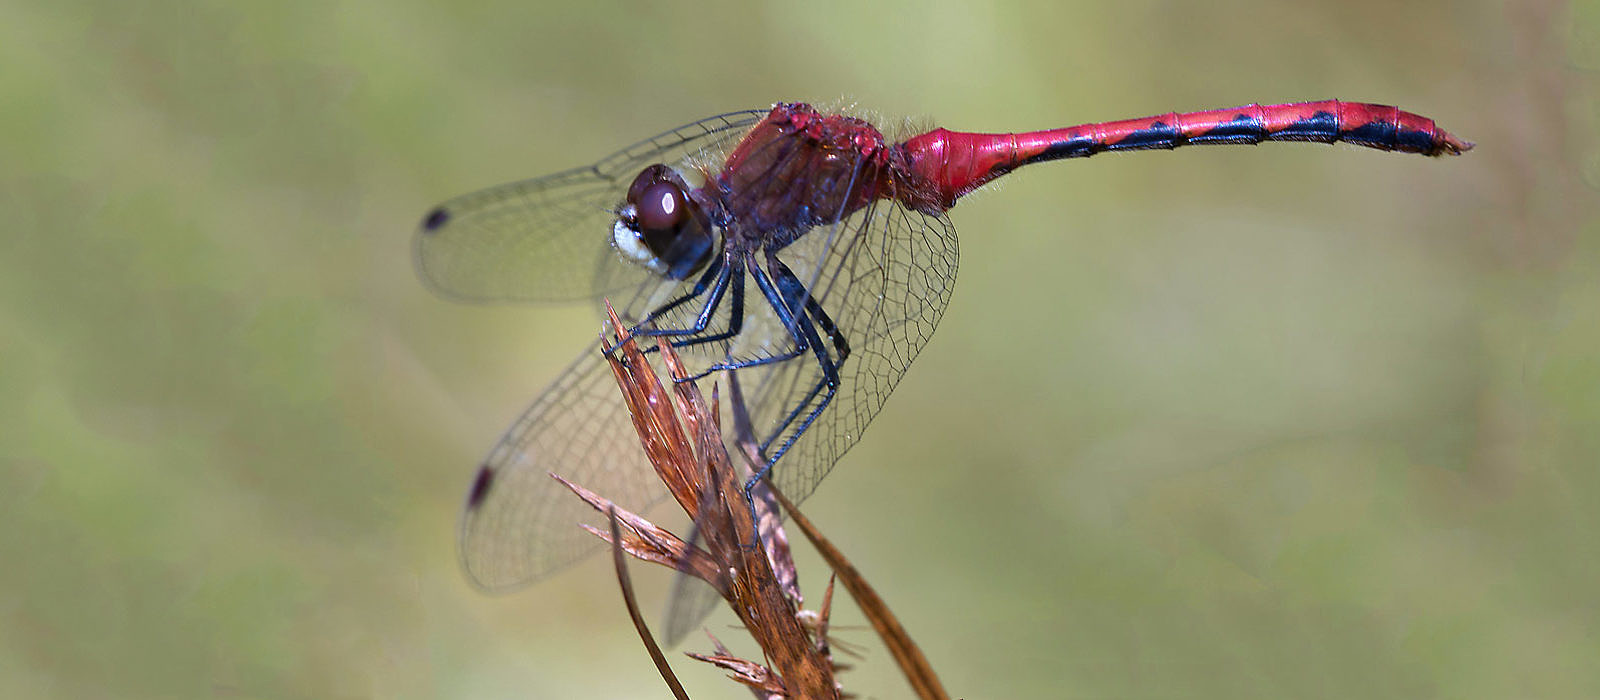 Dragonfly and Damselfly Photography by Bryan Pfeiffer